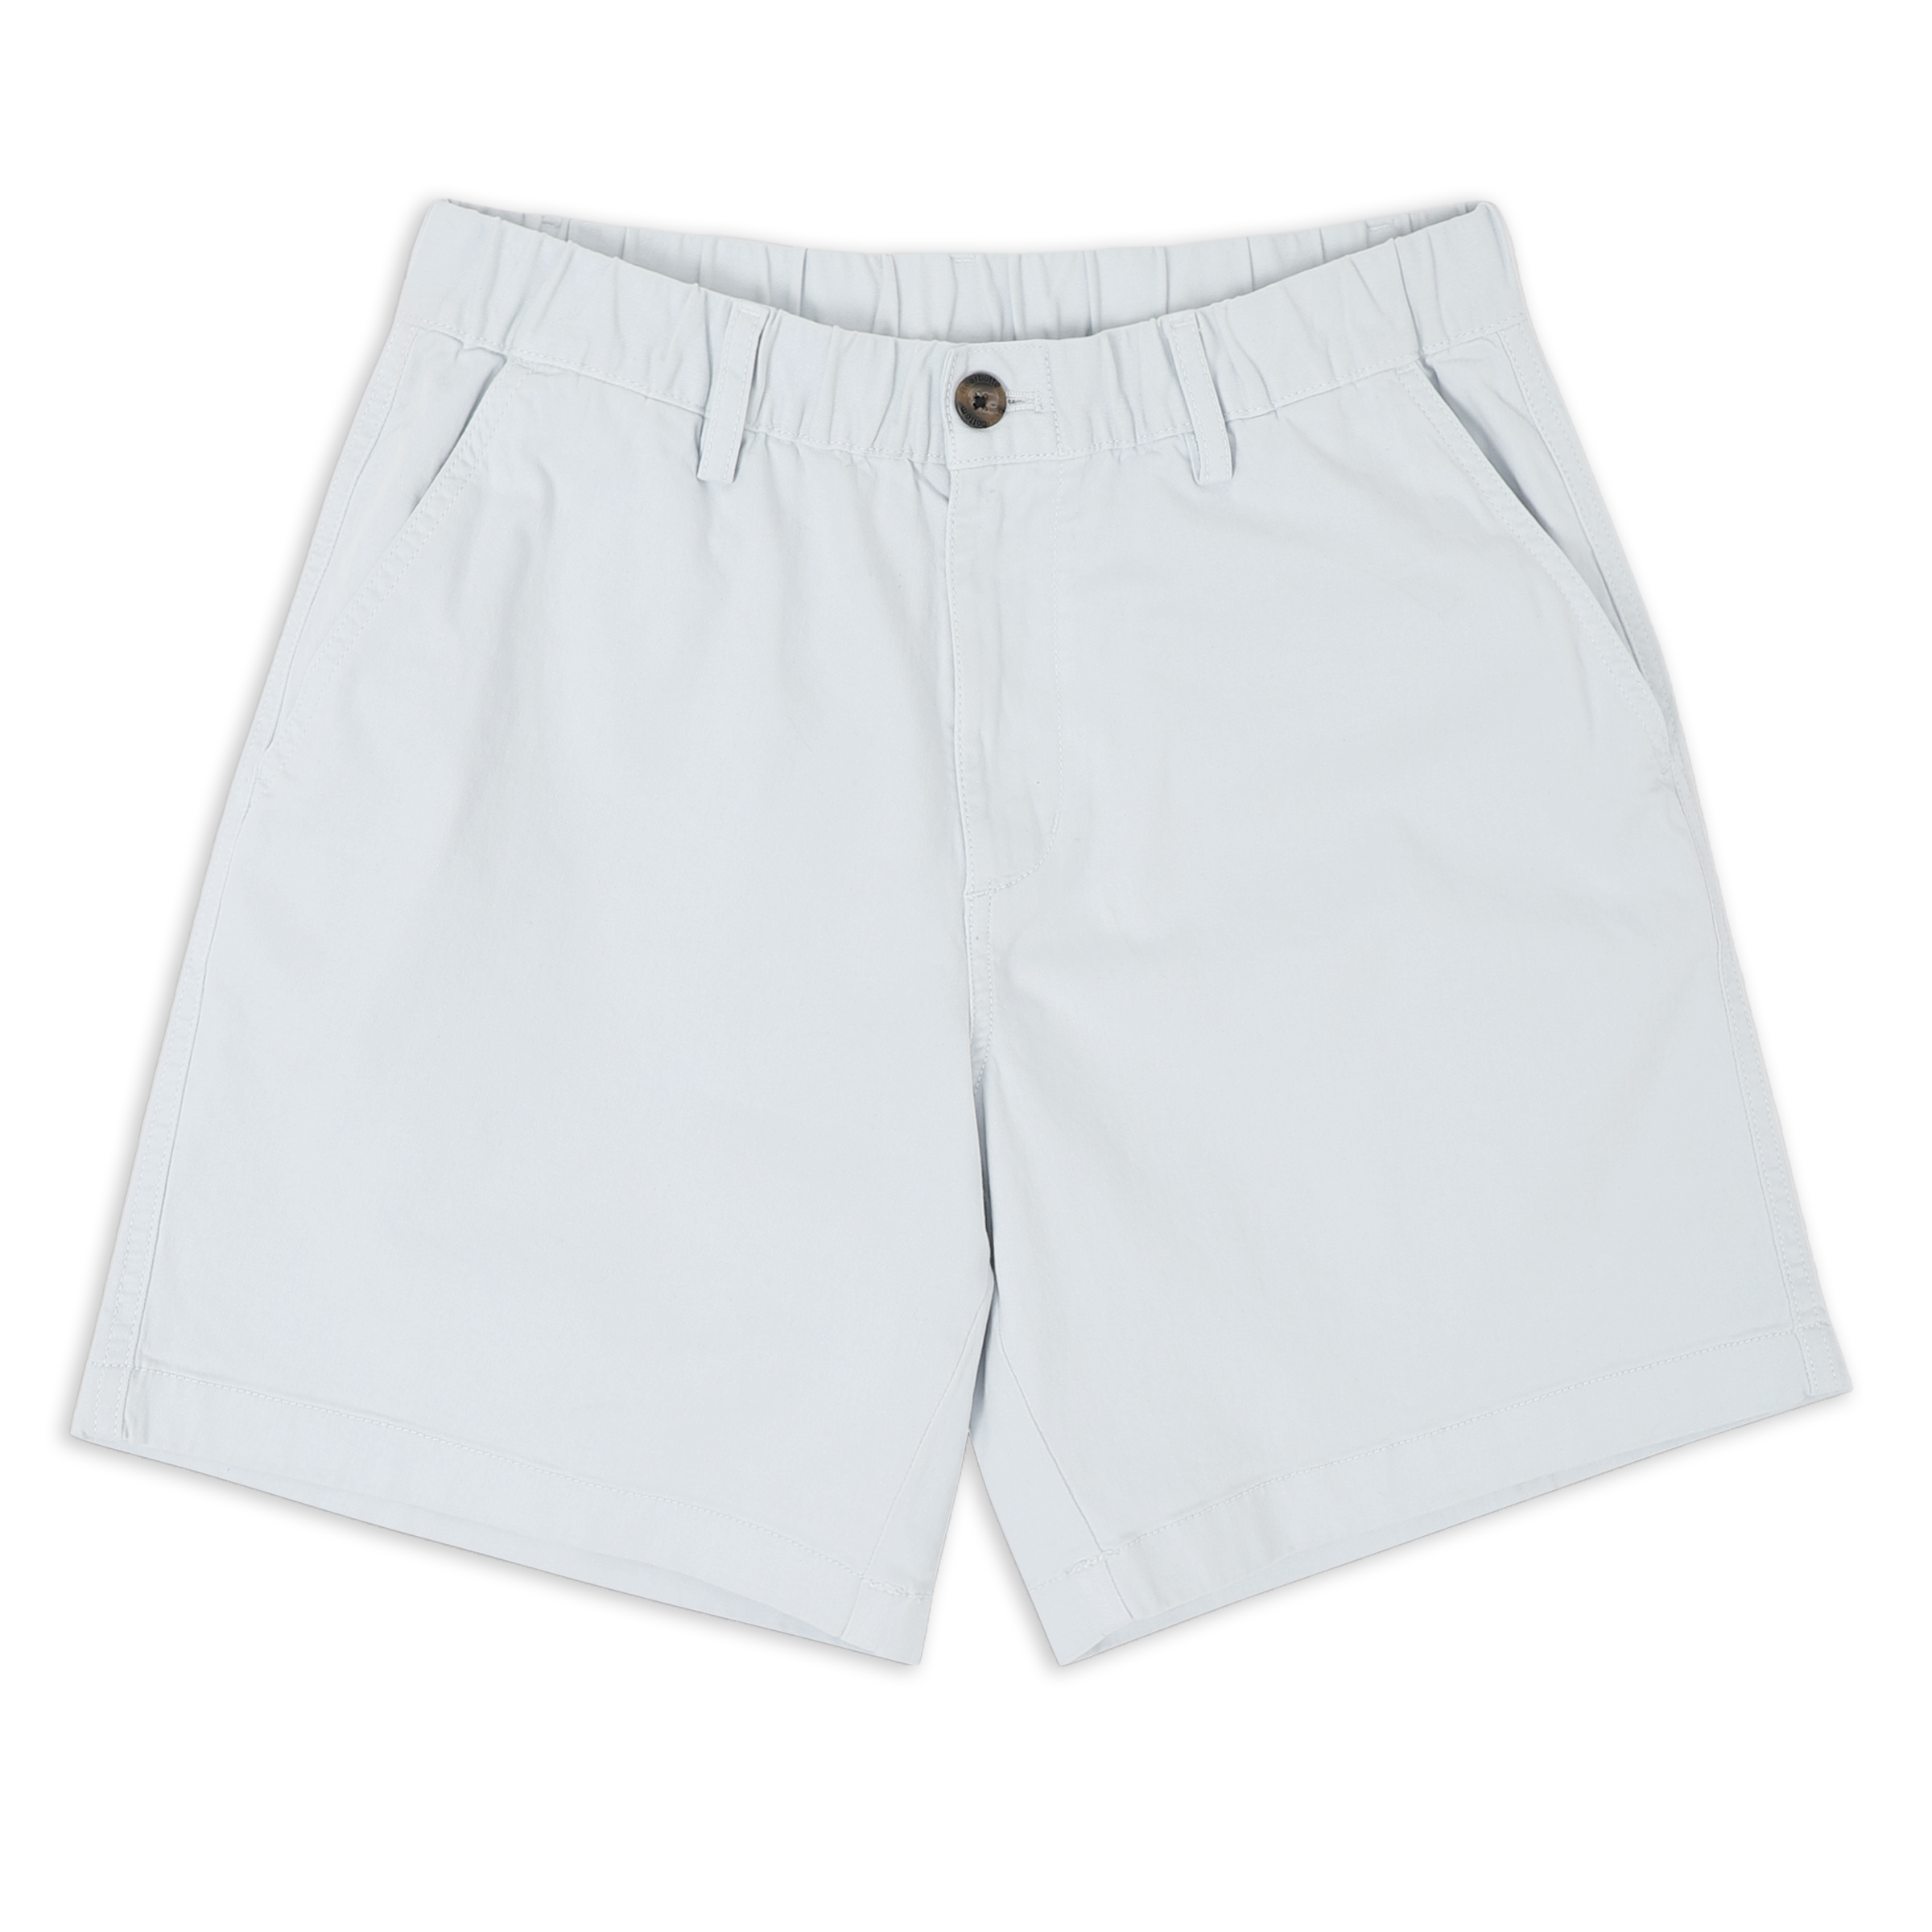 Stretch Short 7" Light Blue front with elastic waistband, belt loops, zipper fly, faux horn button, and two inseam pockets